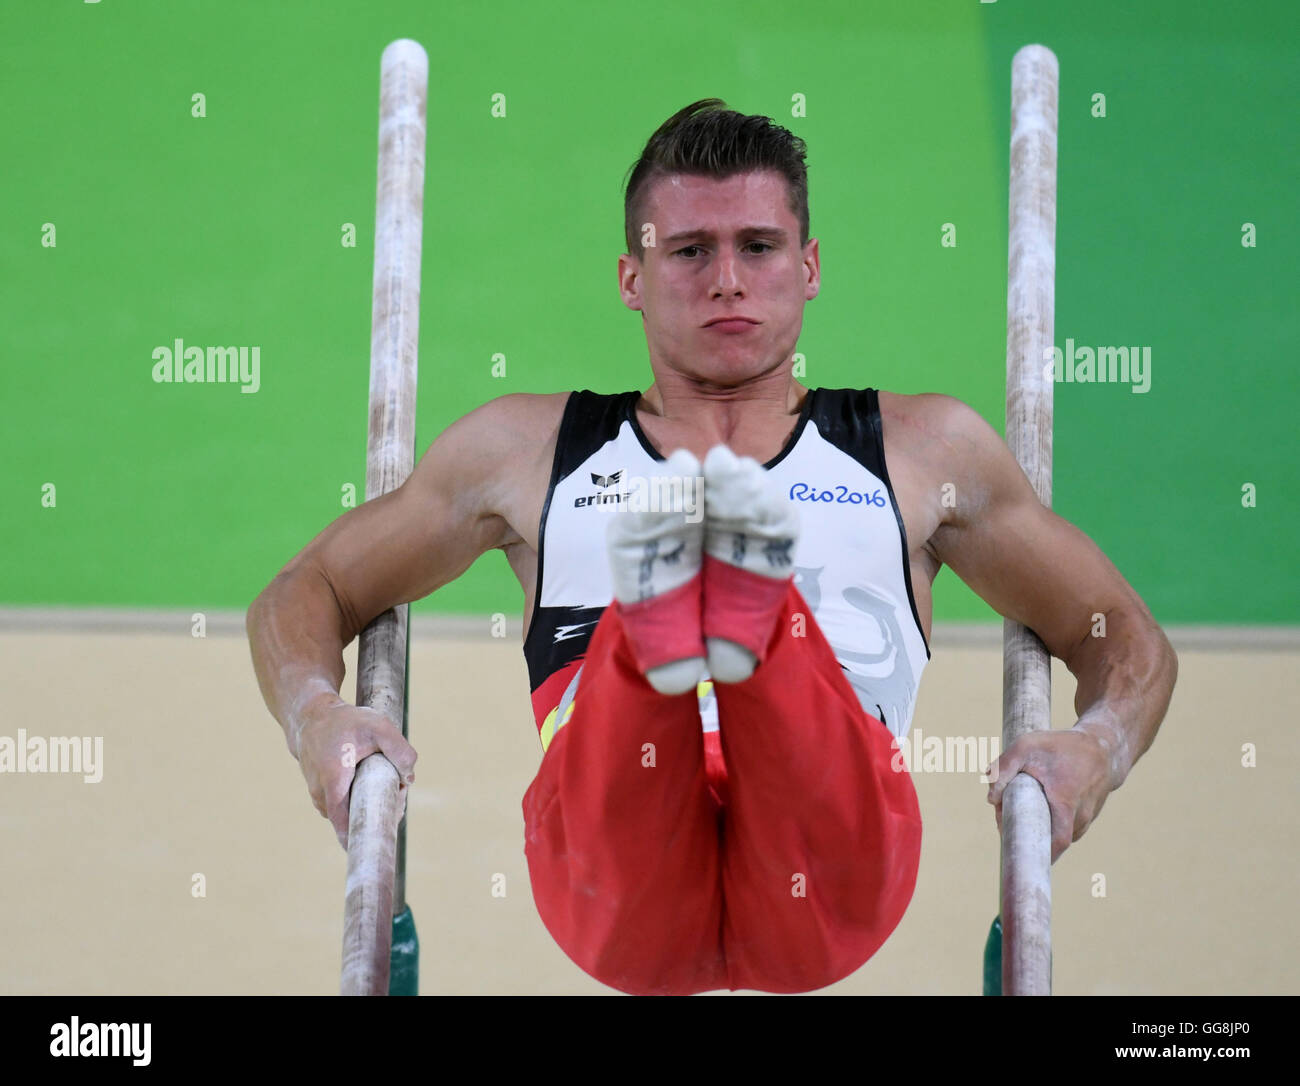 Rio de Janeiro, Brazil. 3rd Aug, 2016. Lukas Dauser of Germany practices on parallel bars during a training session of the men's Artistic Gymnastics on pommel horse at Olympic Arena in Barra prior to the Rio 2016 Olympic Games in Rio de Janeiro, Brazil, 3 August 2016. Rio 2016 Olympic Games take place from 05 to 21 August. Photo: Bernd Thissen/dpa/Alamy Live News Stock Photo